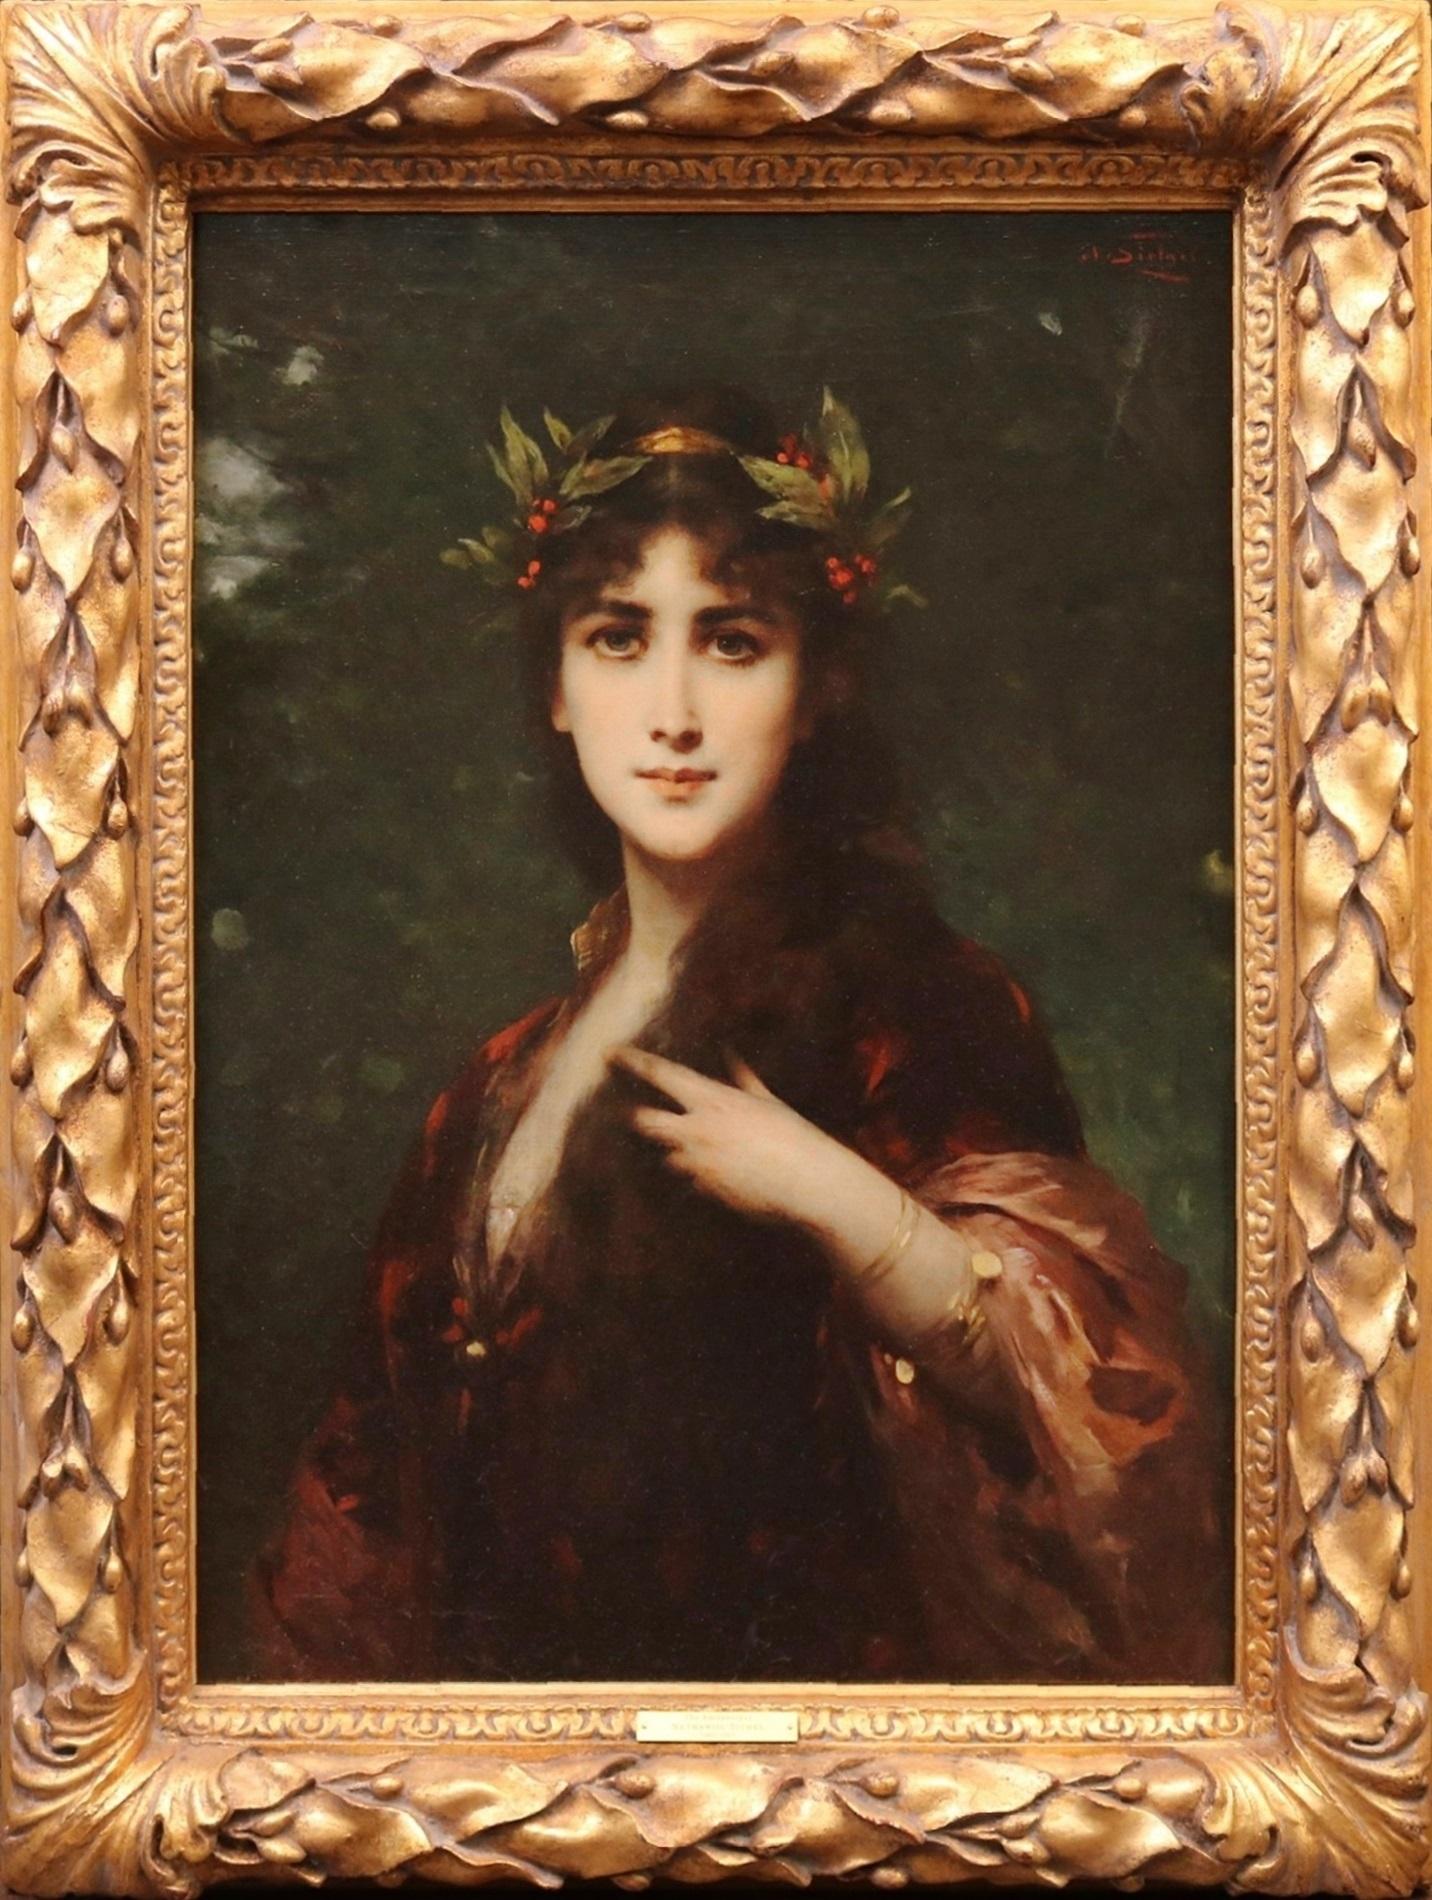 ‘The Enchantress’ by Nathaniel Sichel (1843-1907). This large fine 19th century oil on canvas, depicting a dark-haired beauty wearing a crown of holly, is signed by the artist and hangs in a superb quality carved and gilded Orientalist frame. In